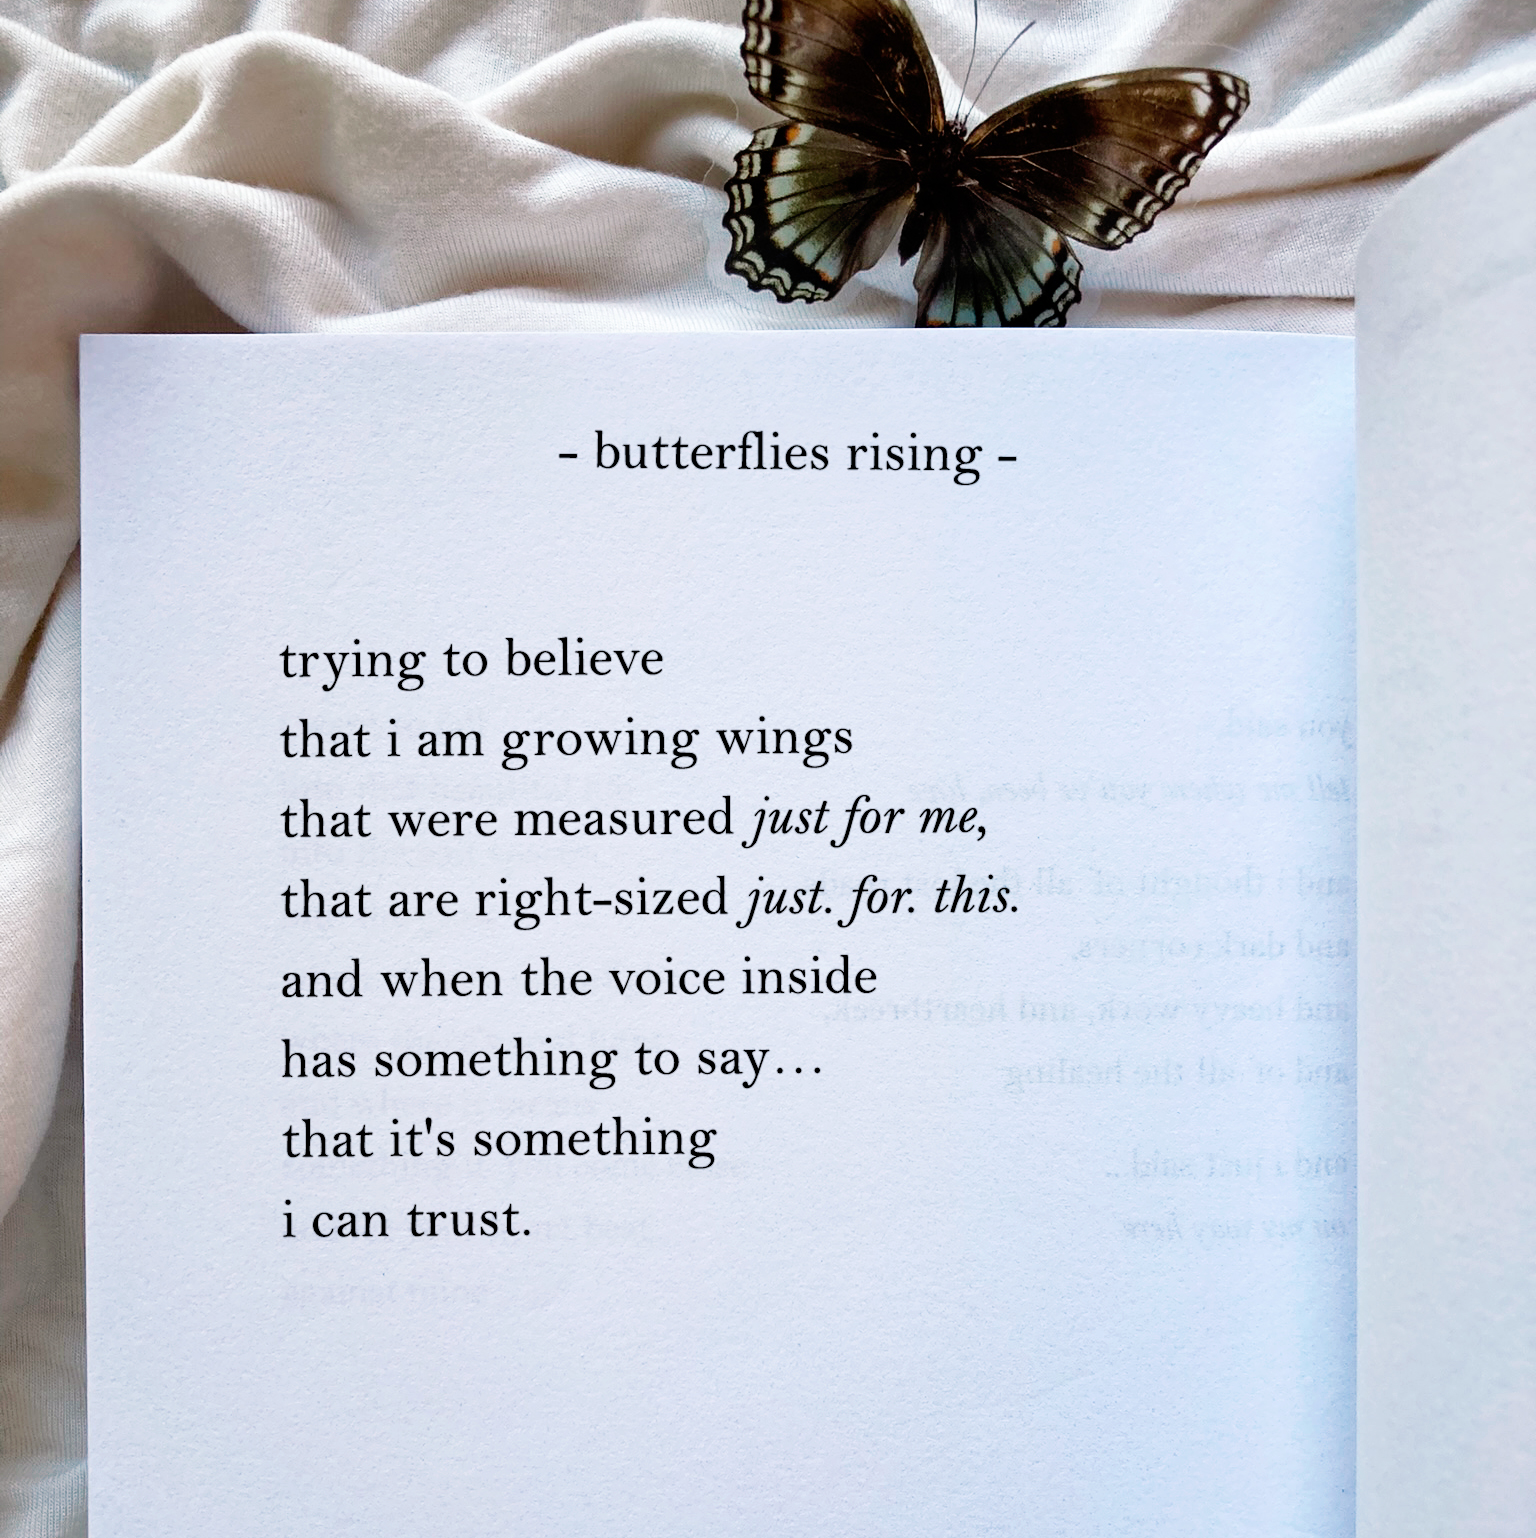 trying to believe that i am growing wings that were measured just for me, that are right-sized just. for. this. and when the voice inside has something to say… that it's something i can trust.